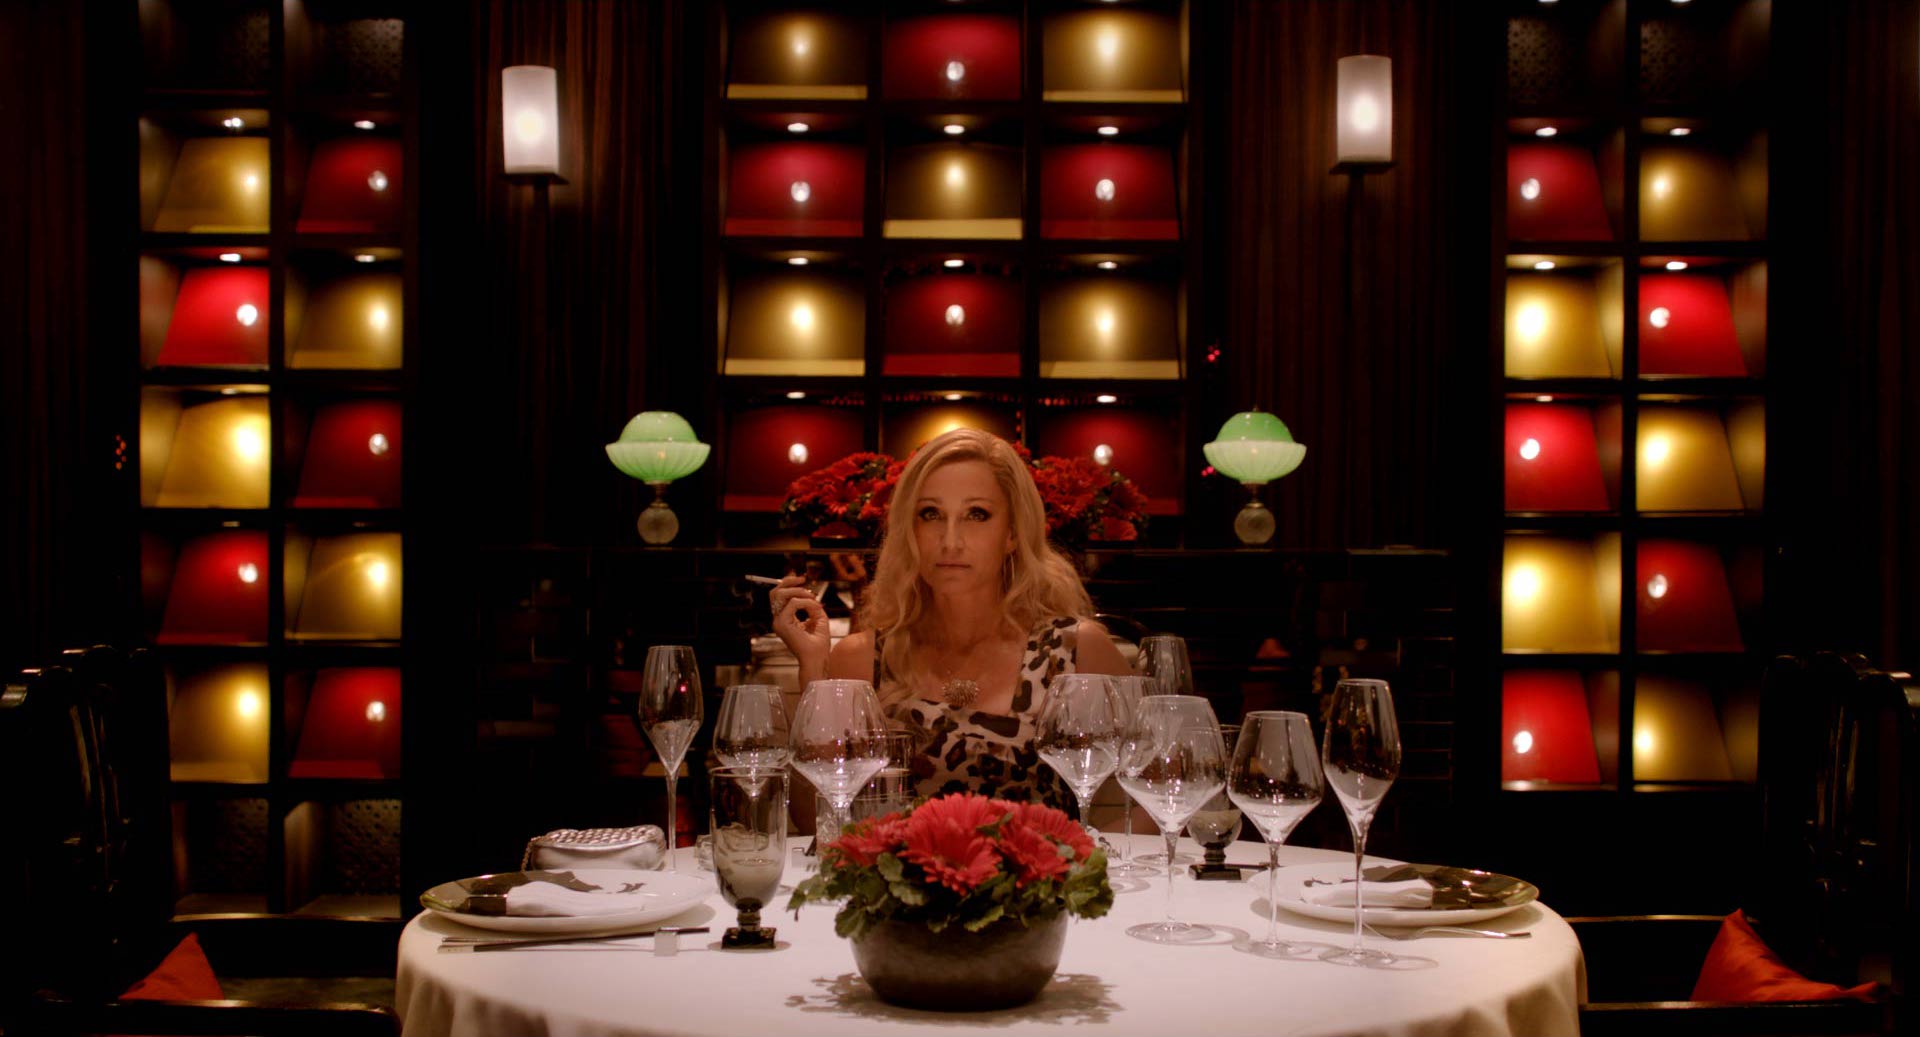 Movie News: Lots of motherly love shown in clip from Only God Forgives